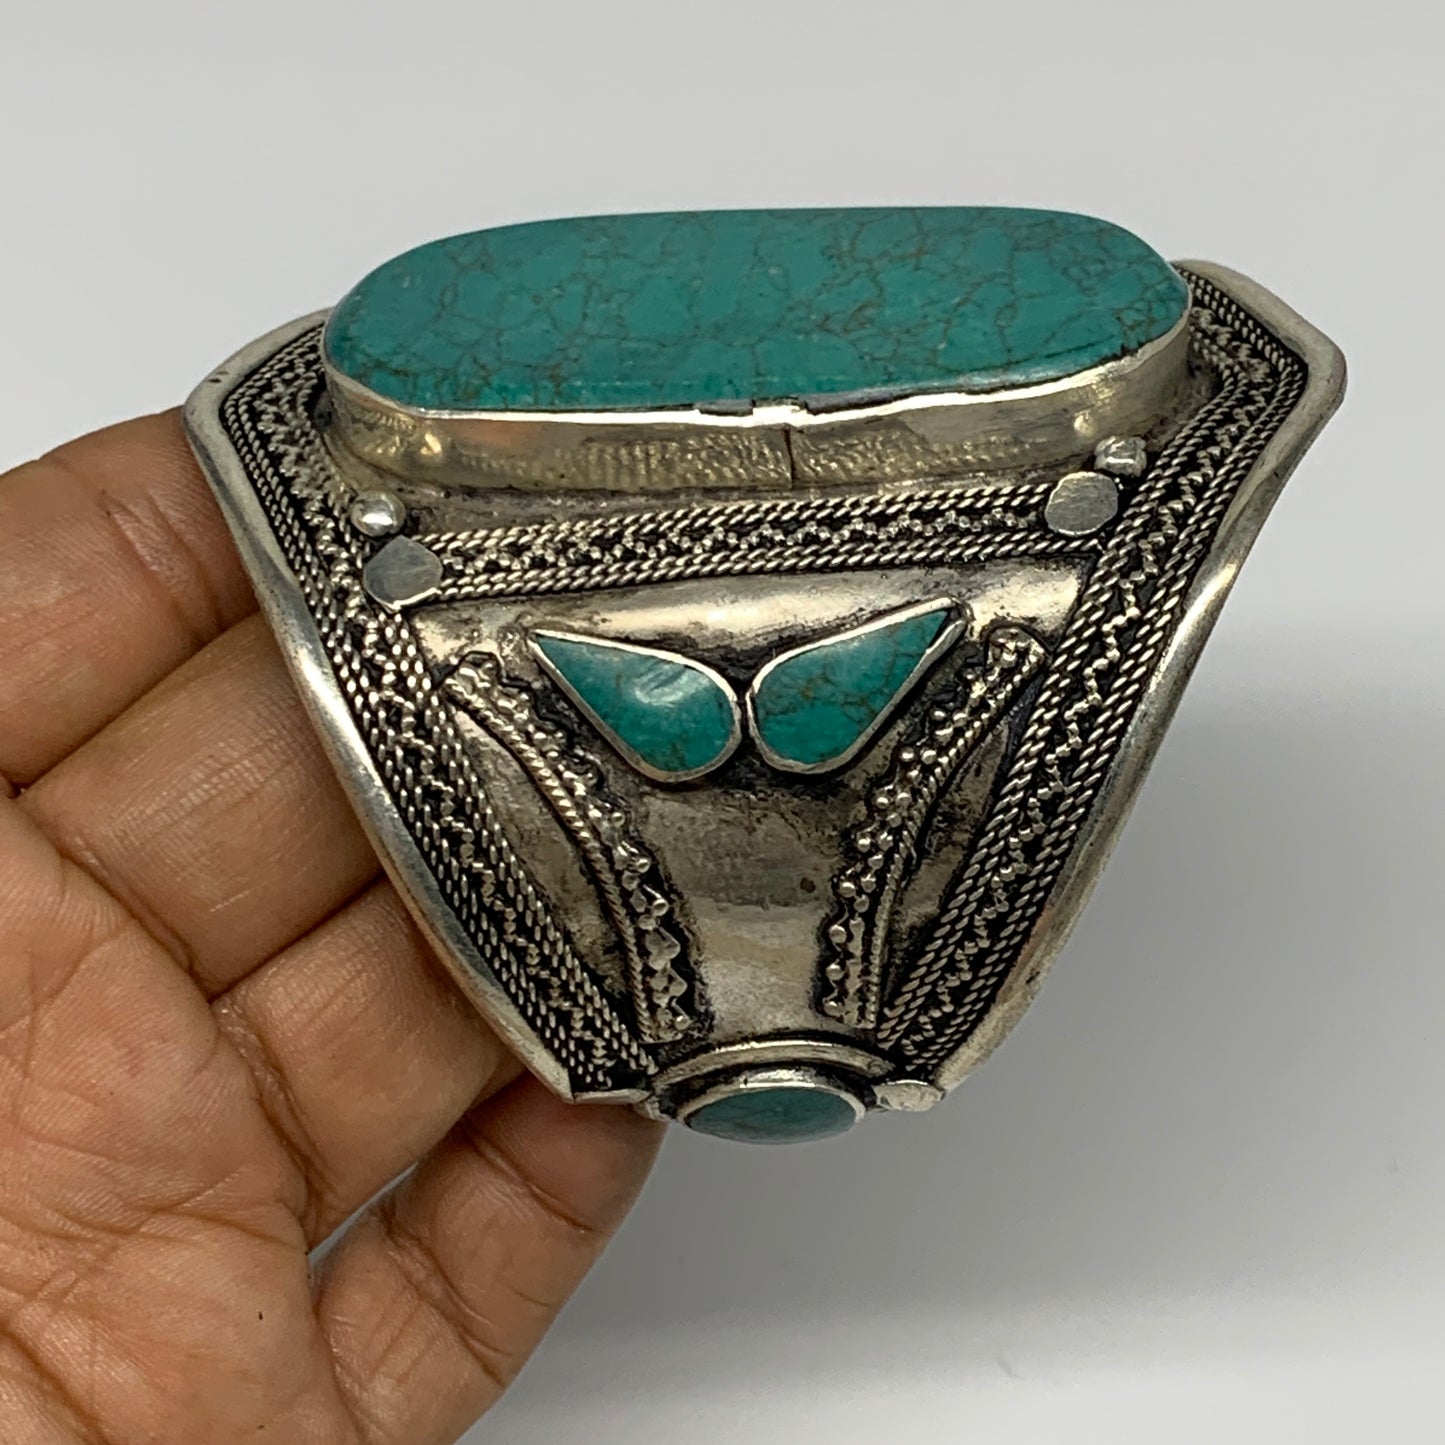 59g, Vintage Reproduced Afghan Turkmen Synthetic Turquoise Cuff Bracelet, B13214